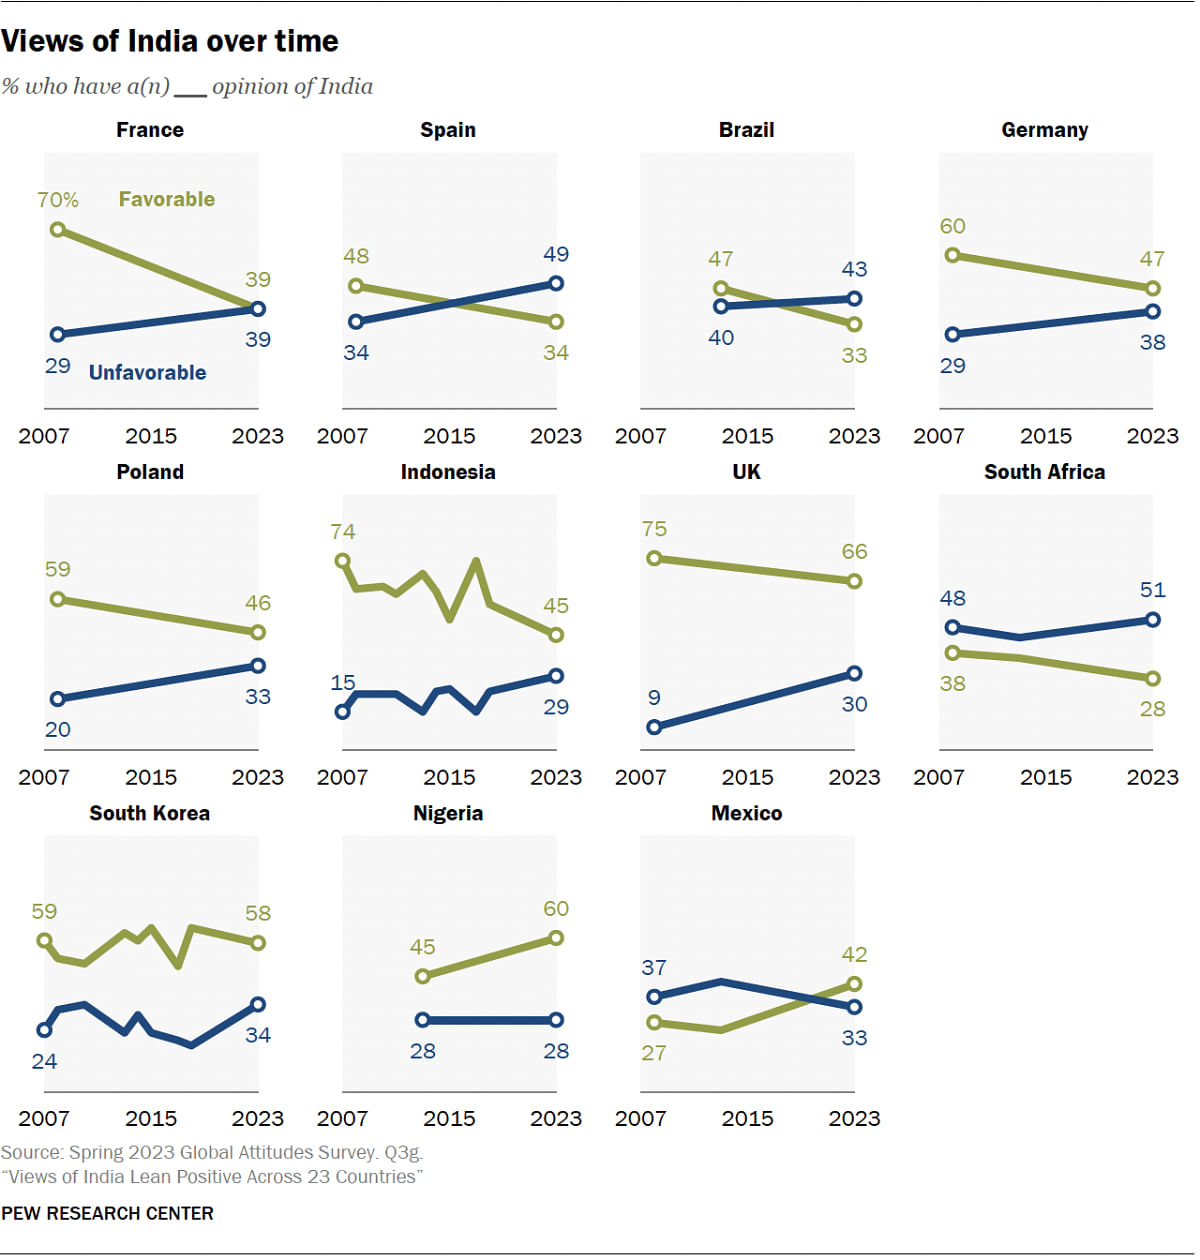 Views of India have become more negative in several countries.